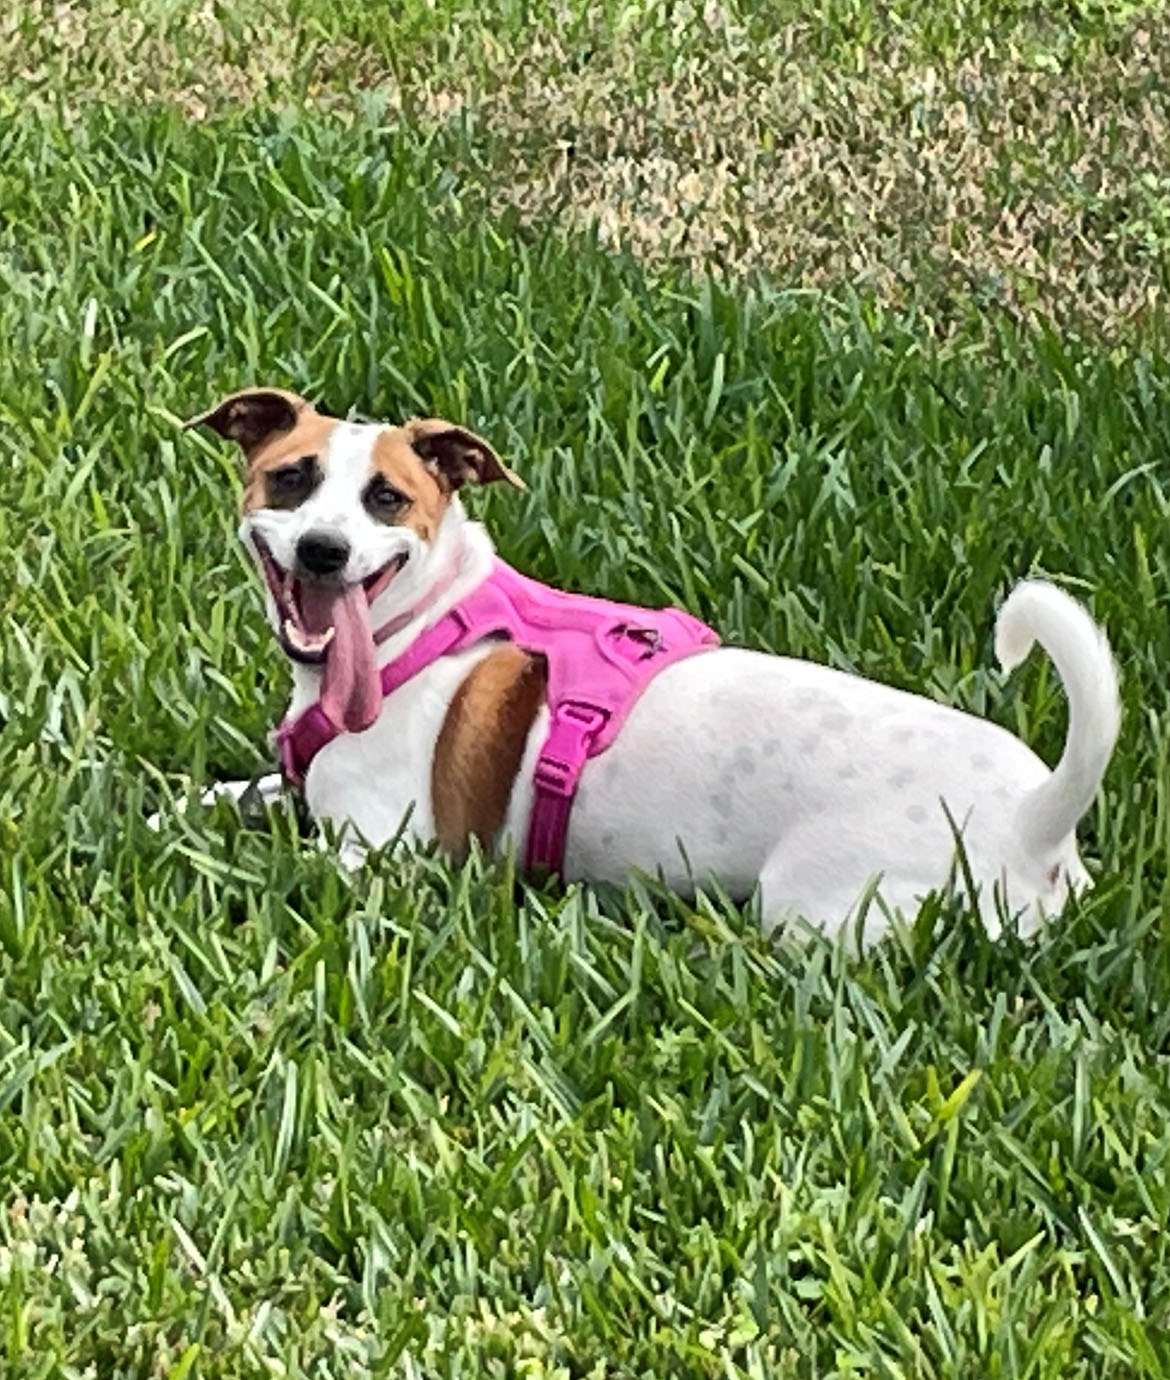 Ellie, a Jack Russell Terrier dog on the grass, wearing a pink vest